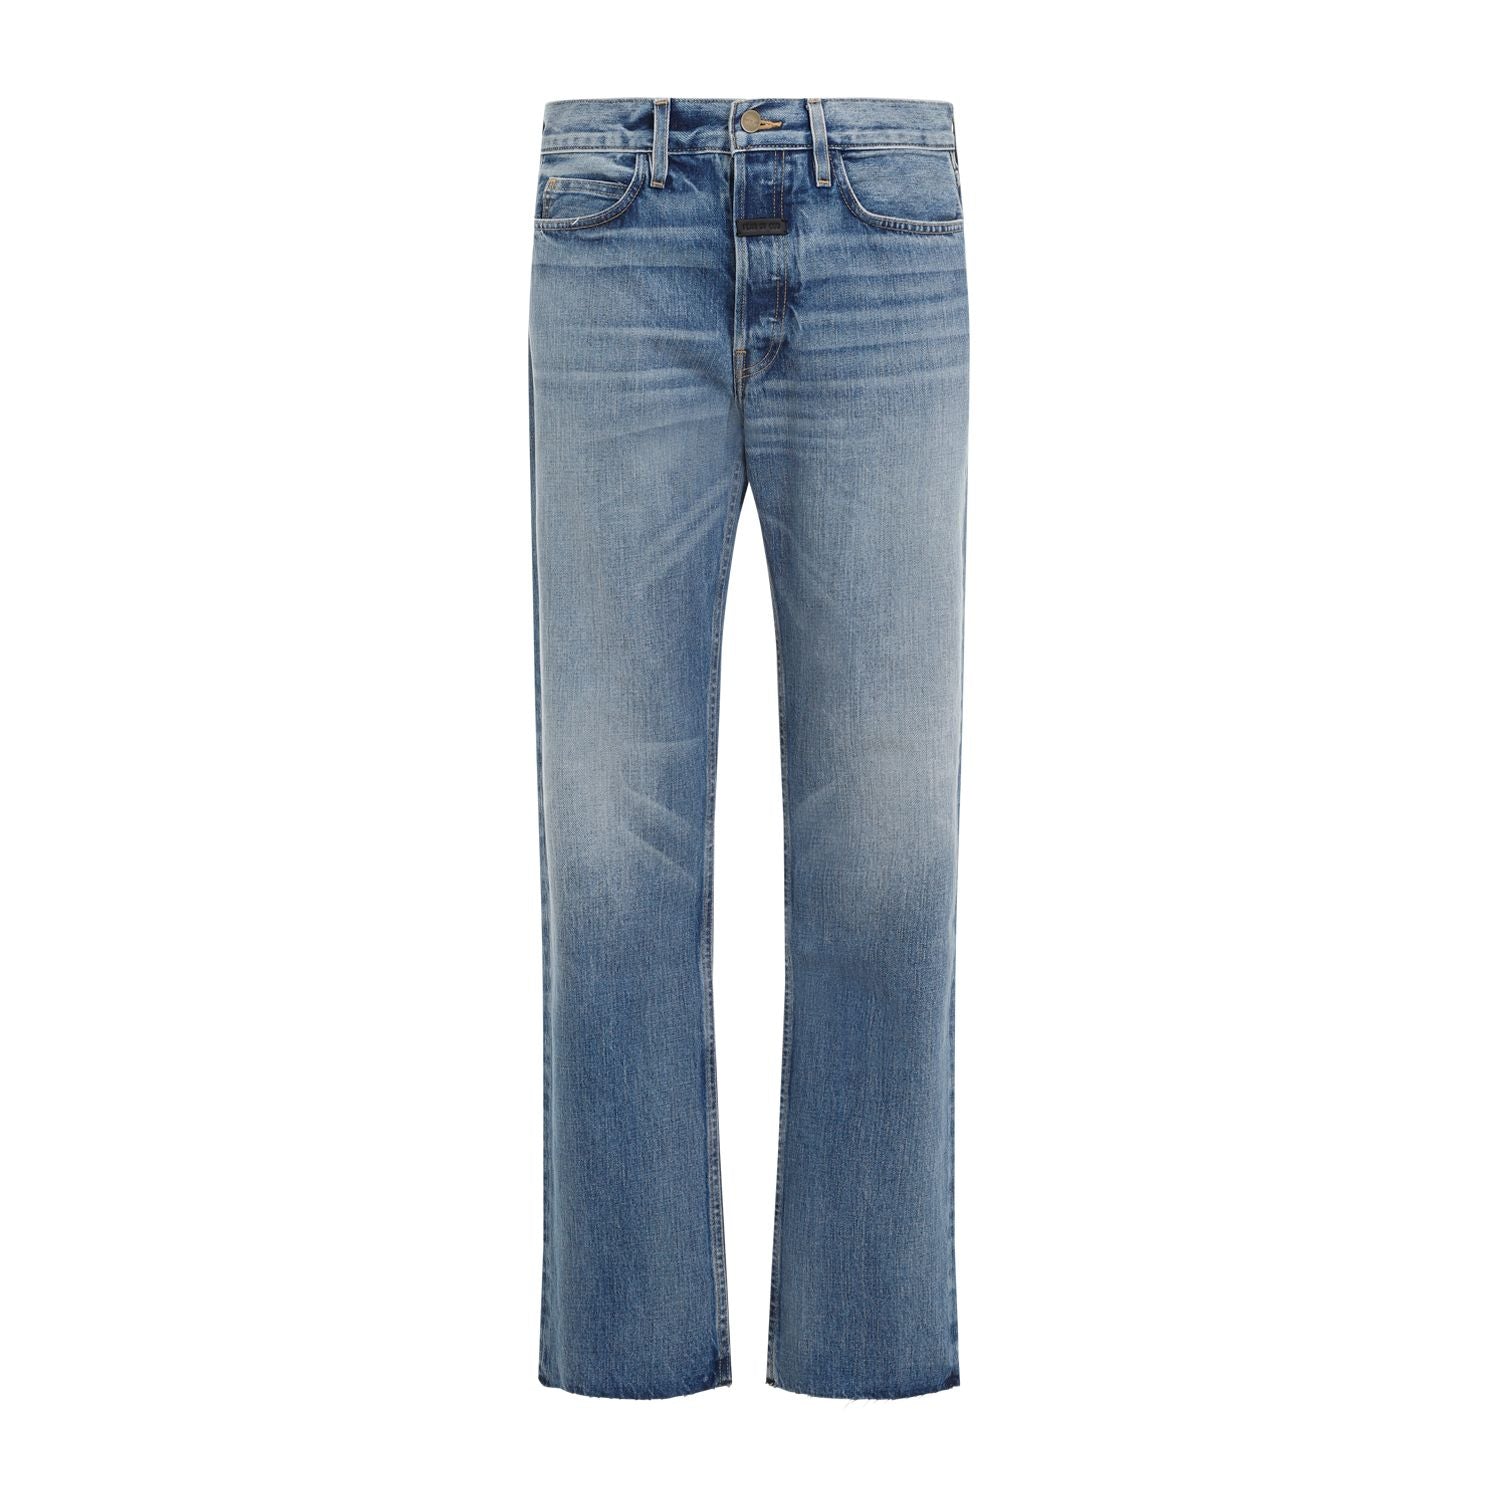 Shop Fear Of God Blue Denim Jeans For Men From The Ss24 Collection